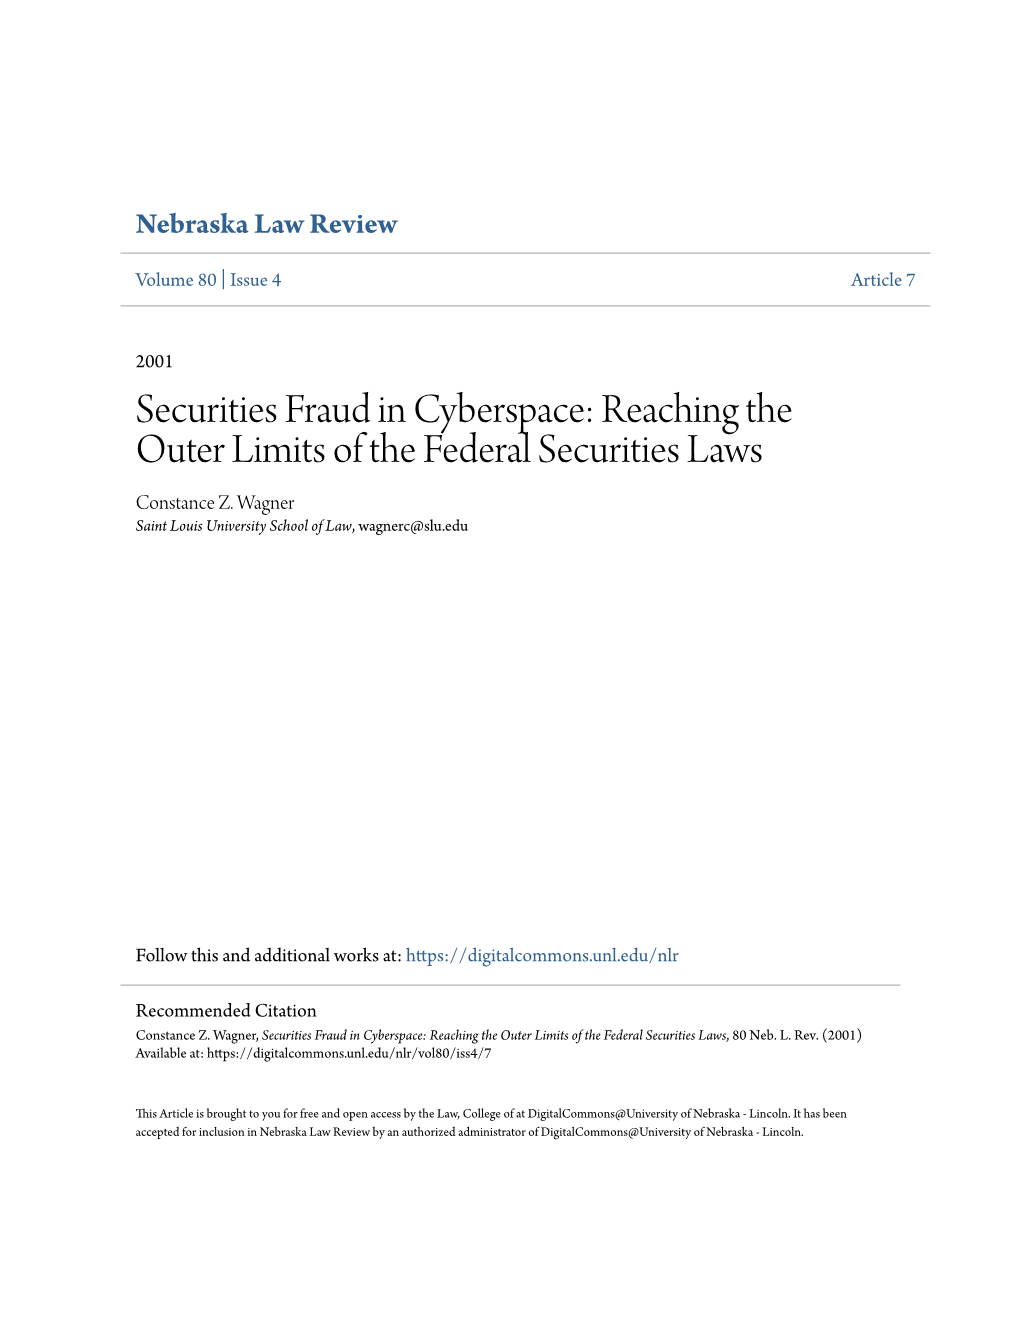 Securities Fraud in Cyberspace: Reaching the Outer Limits of the Federal Securities Laws Constance Z